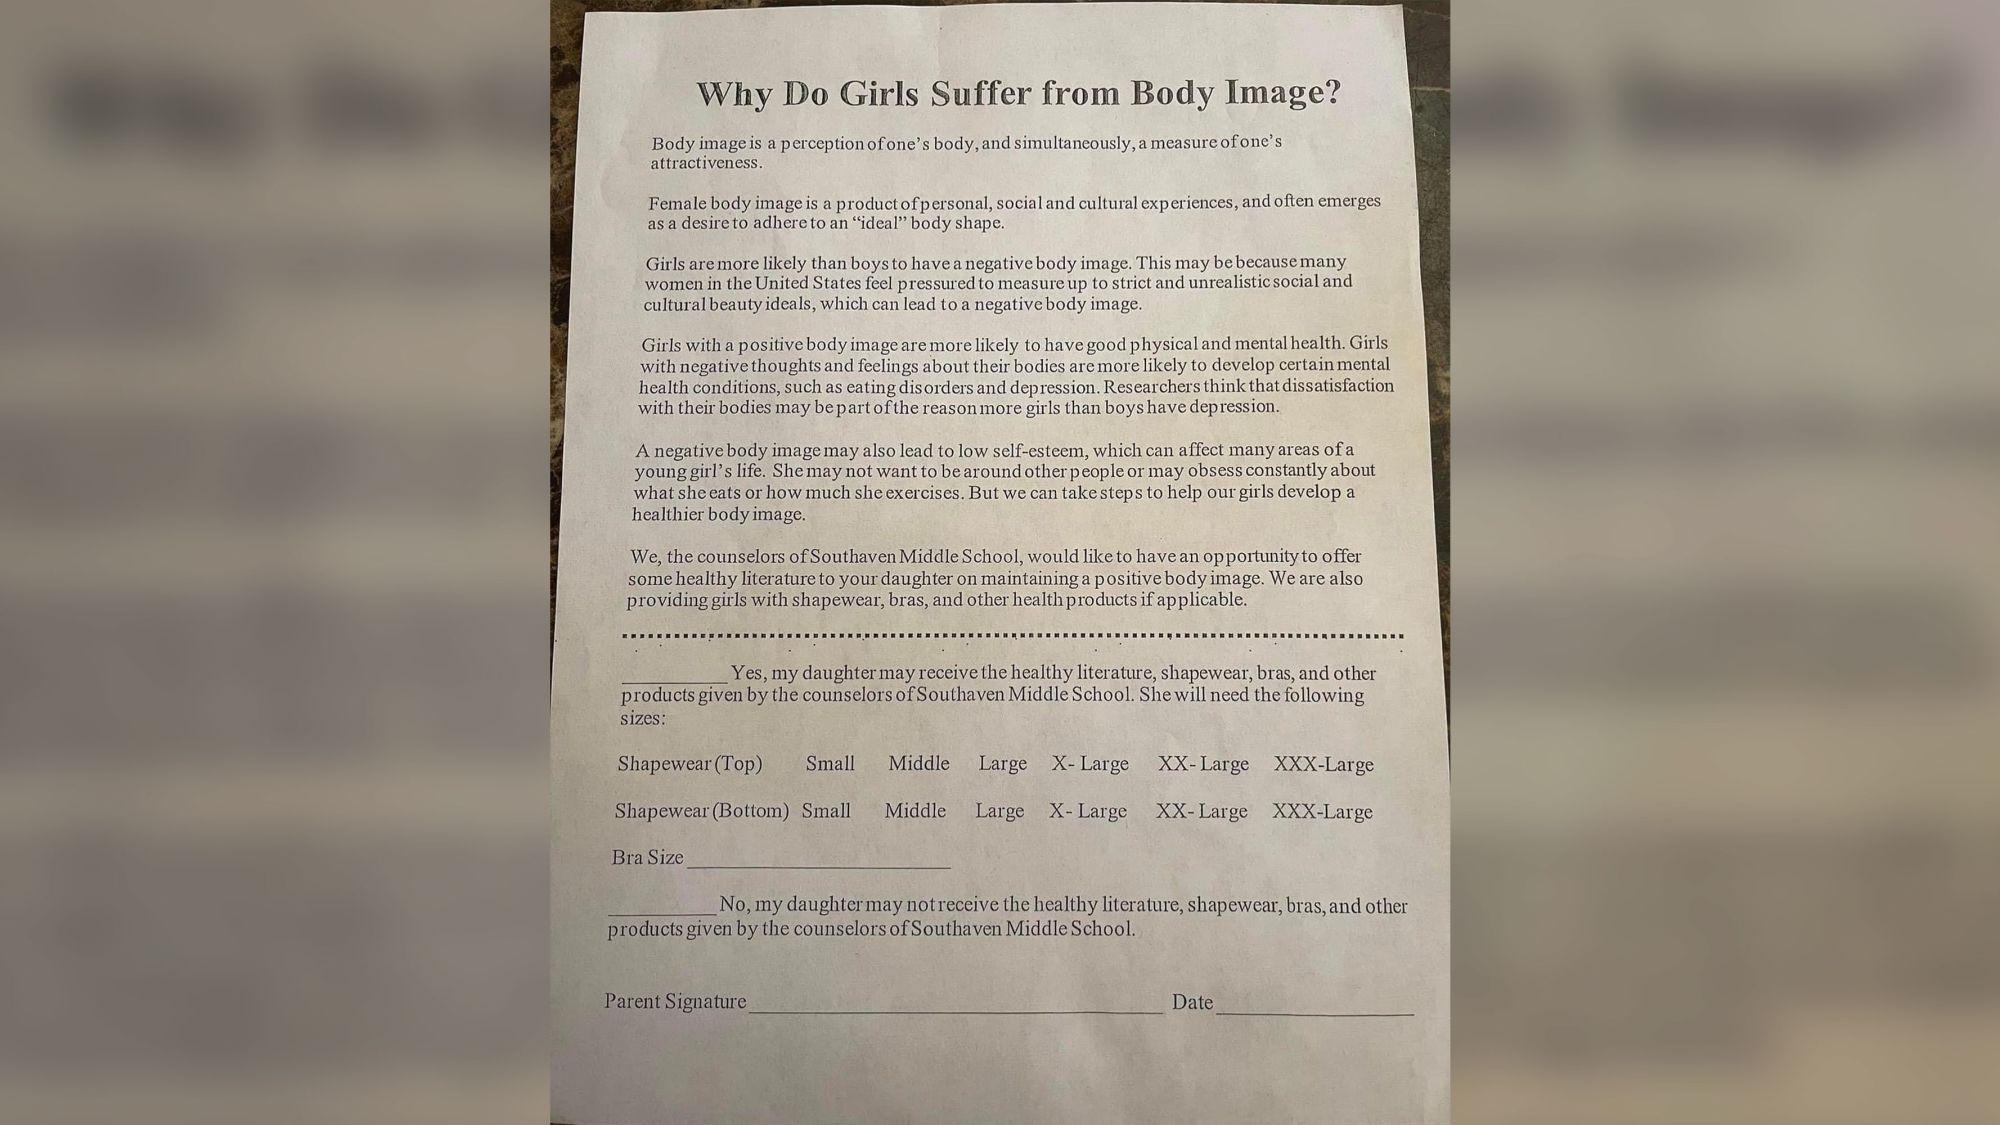 Parents outraged after school suggests shapewear to tackle body image  issues in middle school girls